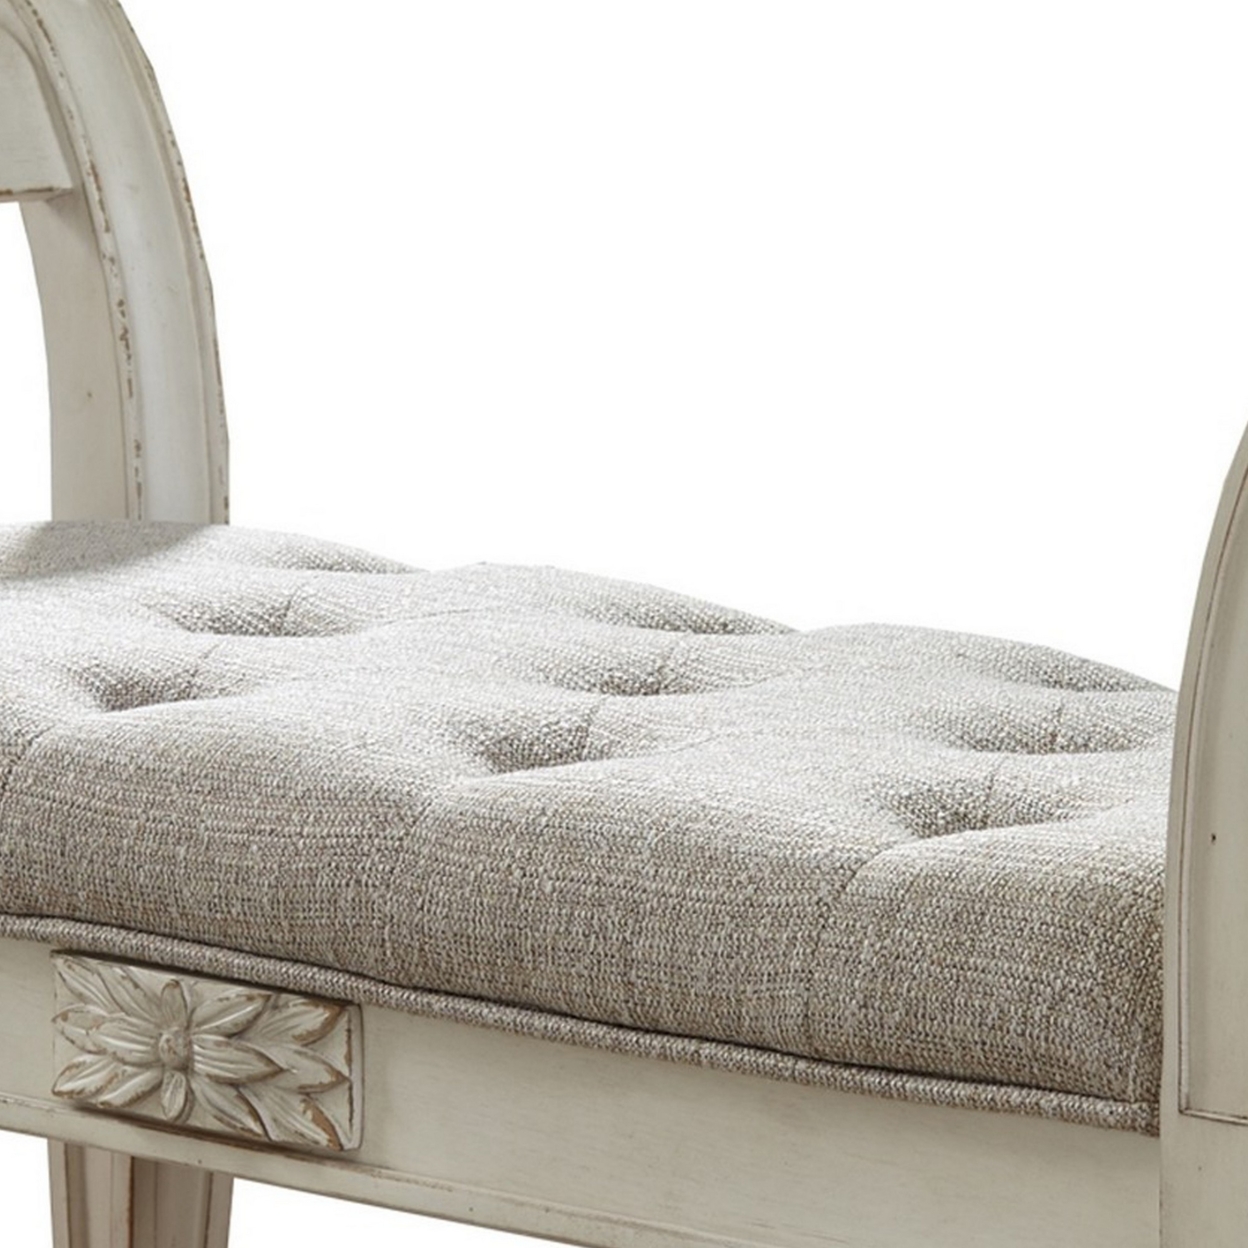 46 Inches Tufted Fabric Padded Wooden Accent Bench, Antique White- Saltoro Sherpi